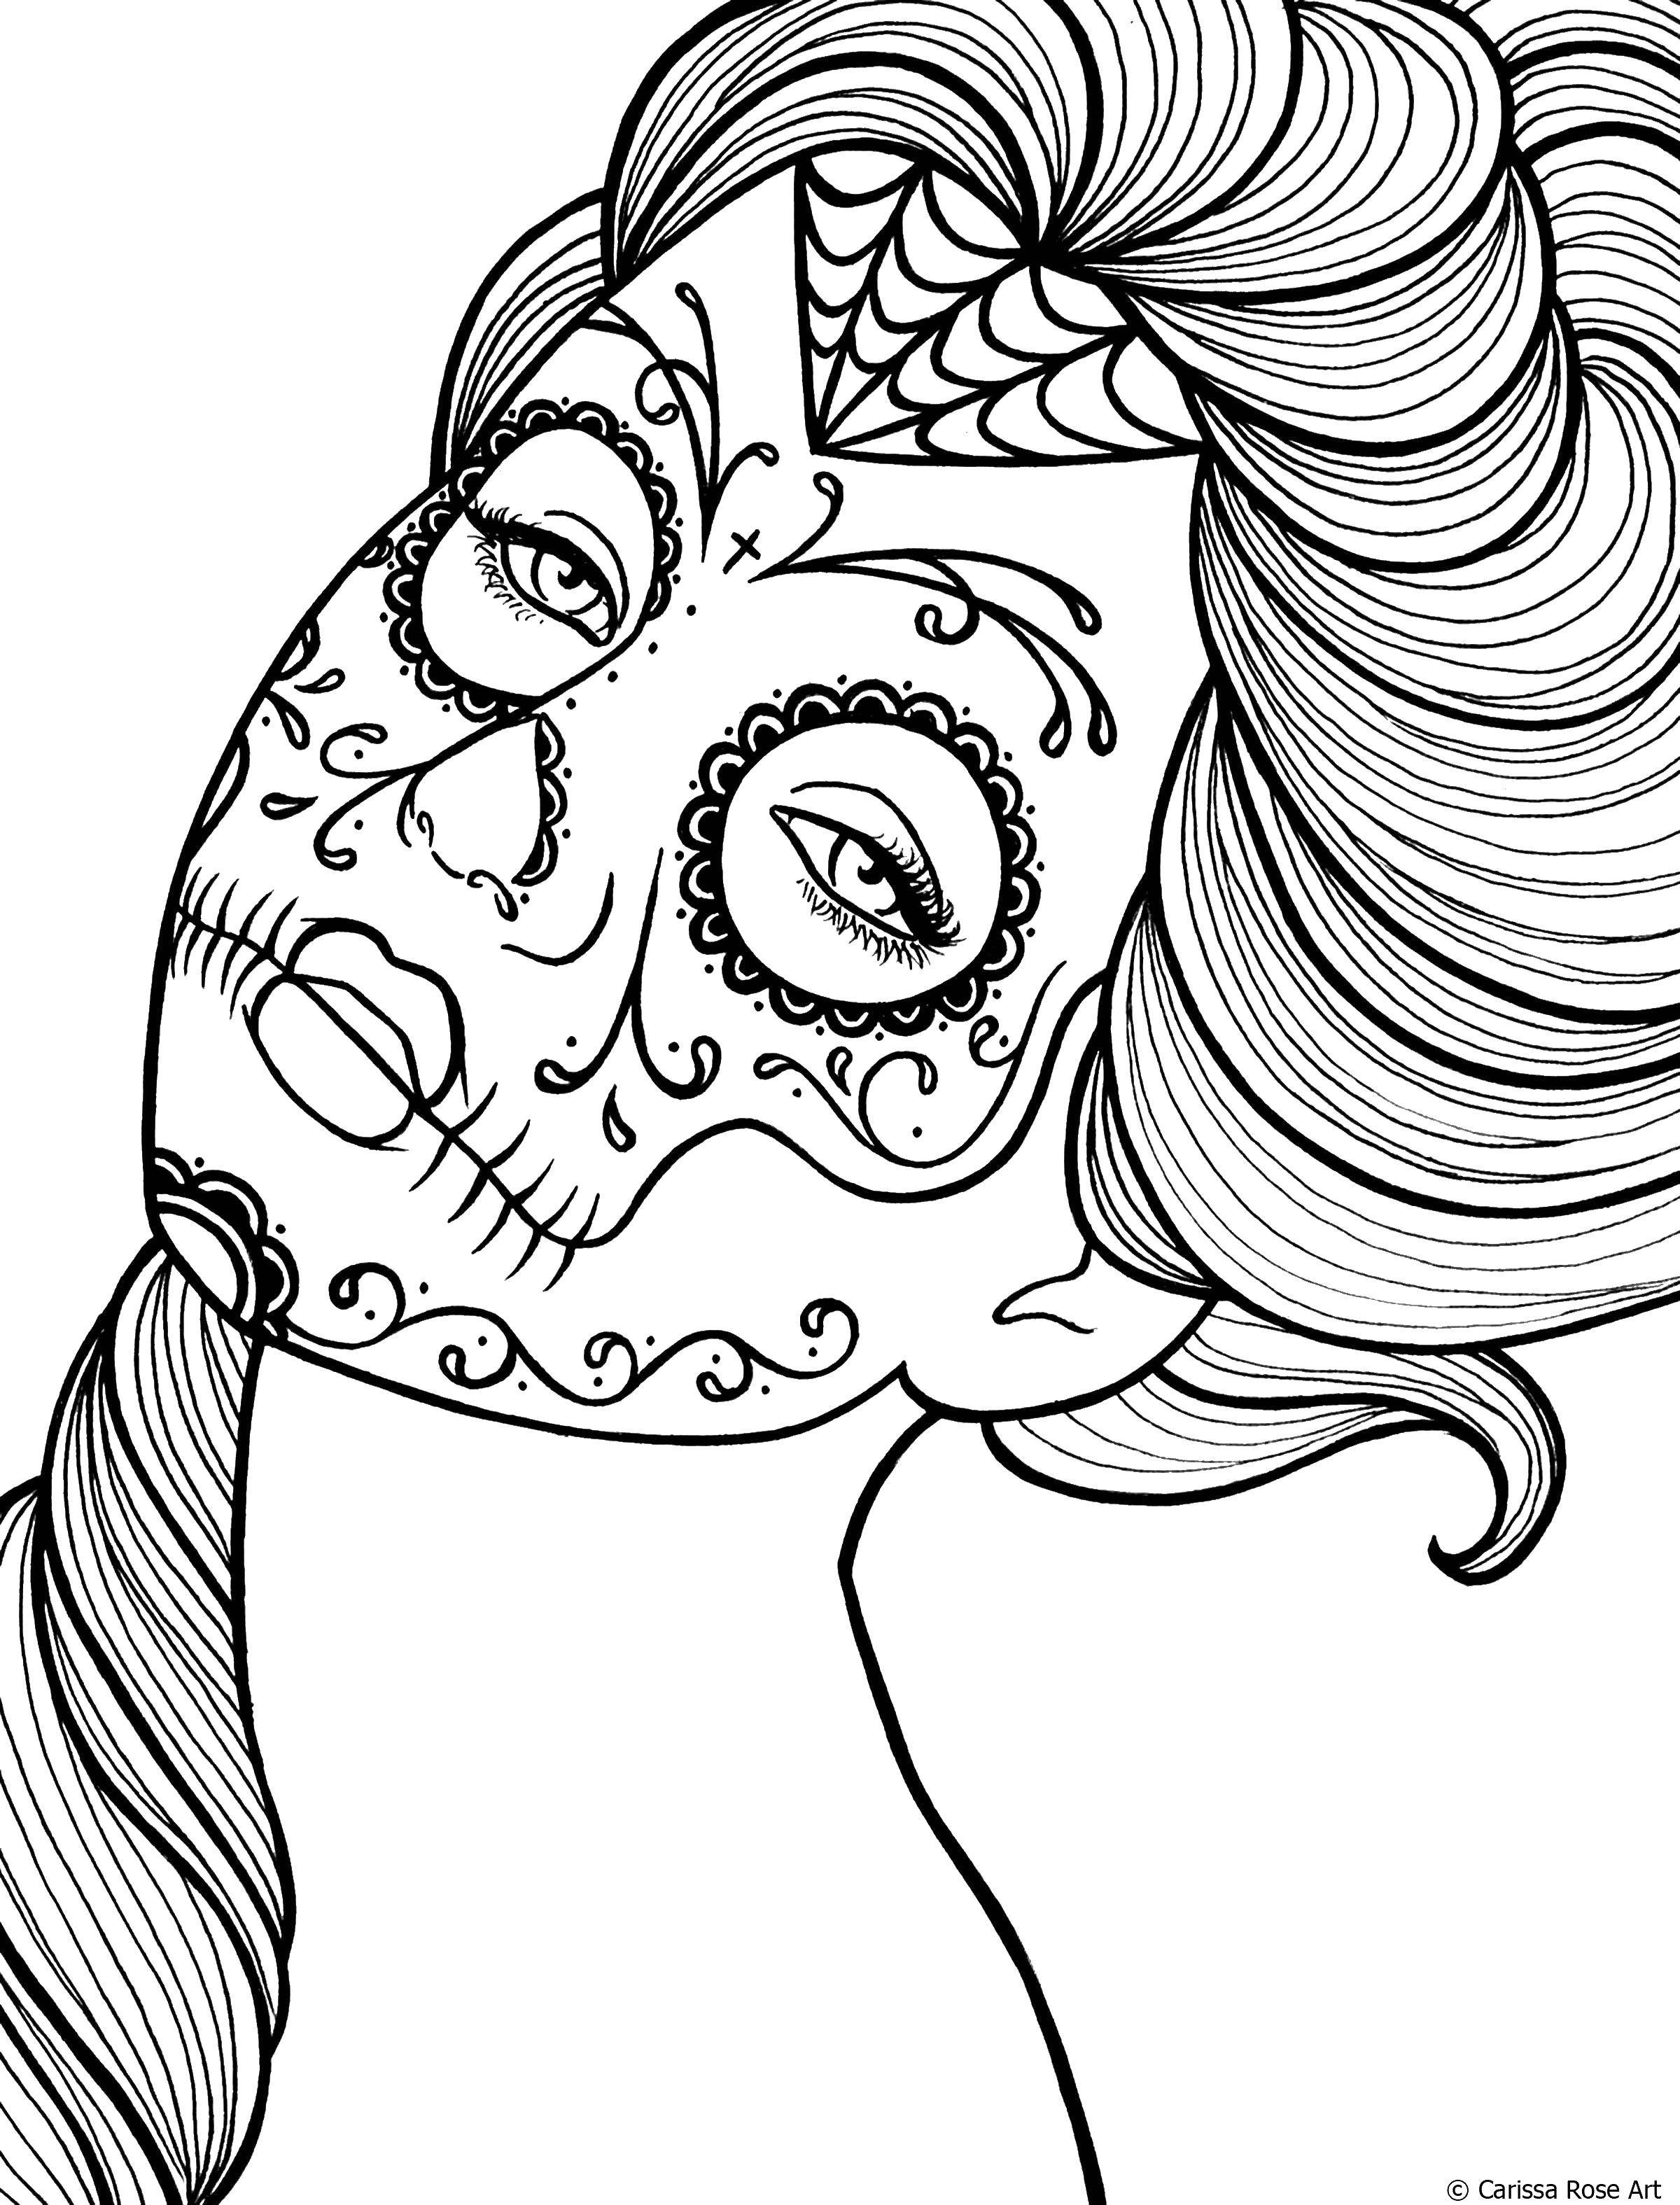 Coloring The girl with the face skull. Category Skull. Tags:  skull, girl.